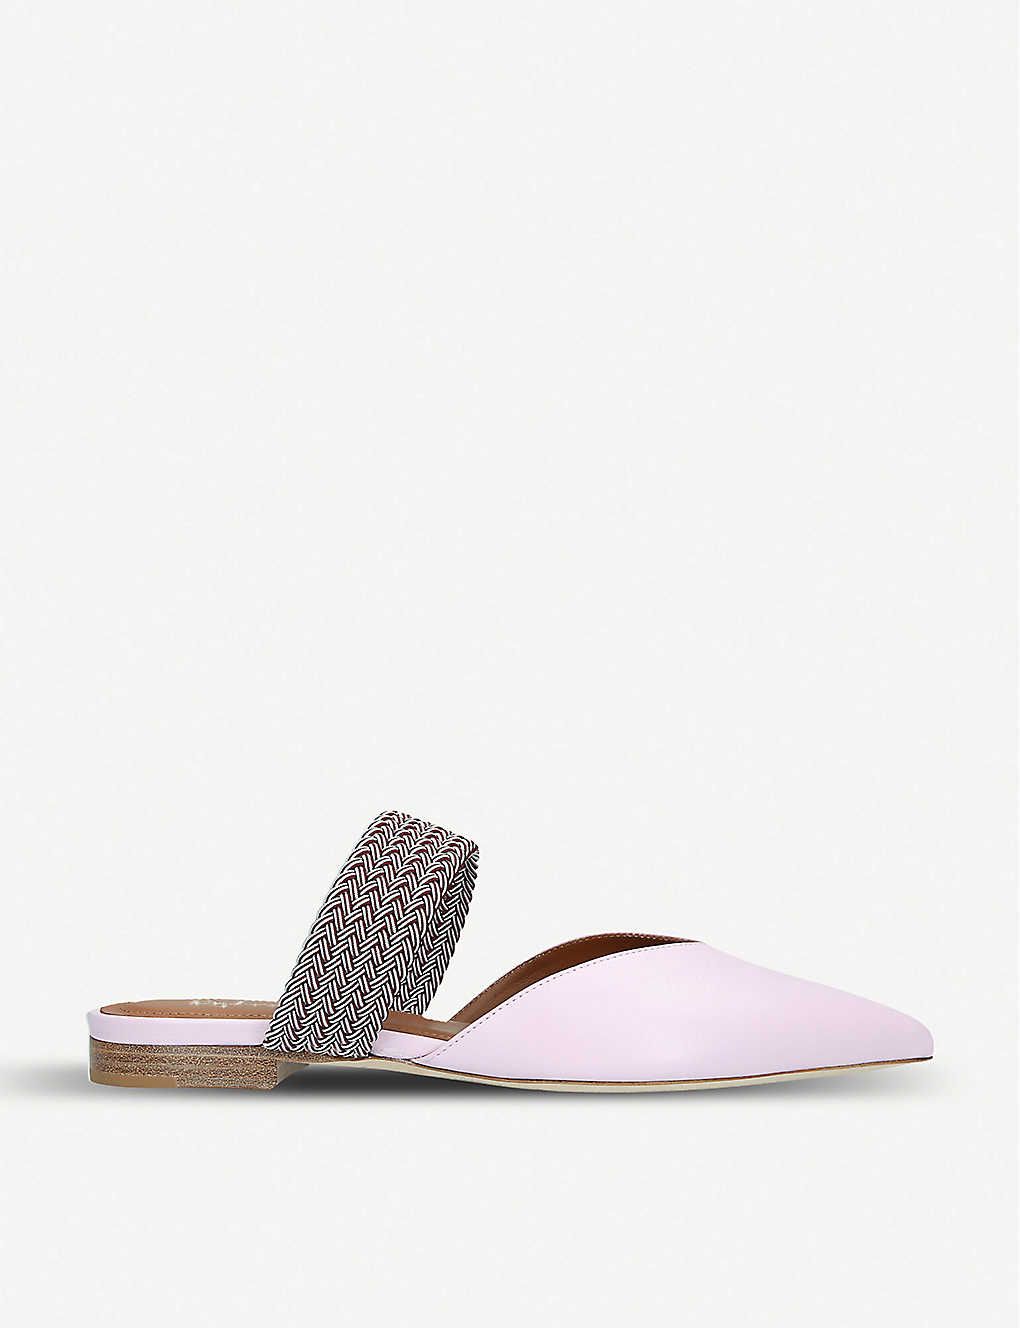 Maisie Luwolt leather and braided flats | Selfridges